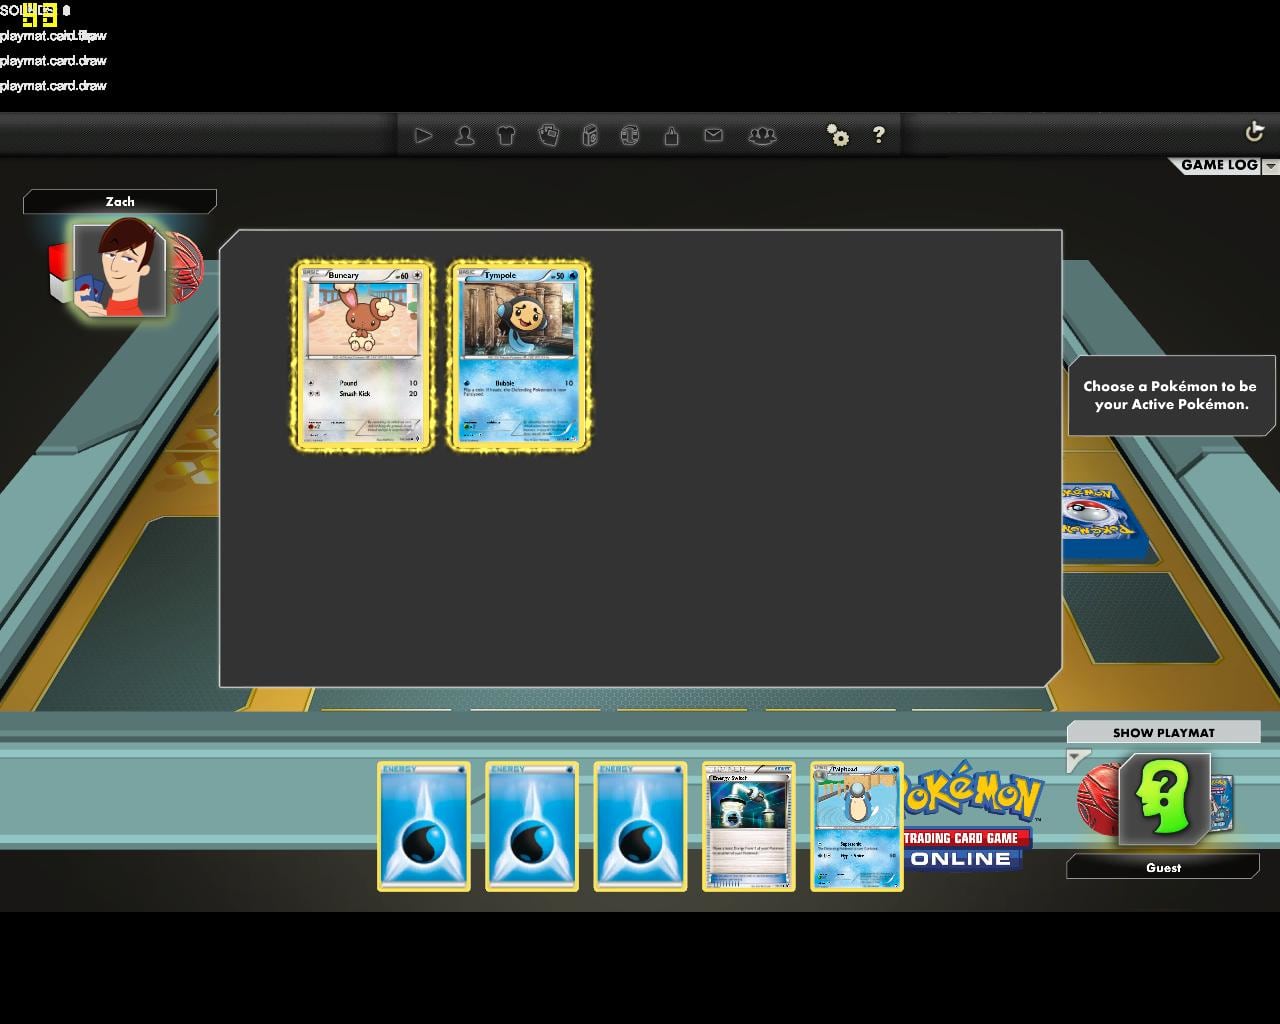 Pokemon Trading Card Game Online - Download1280 x 1024